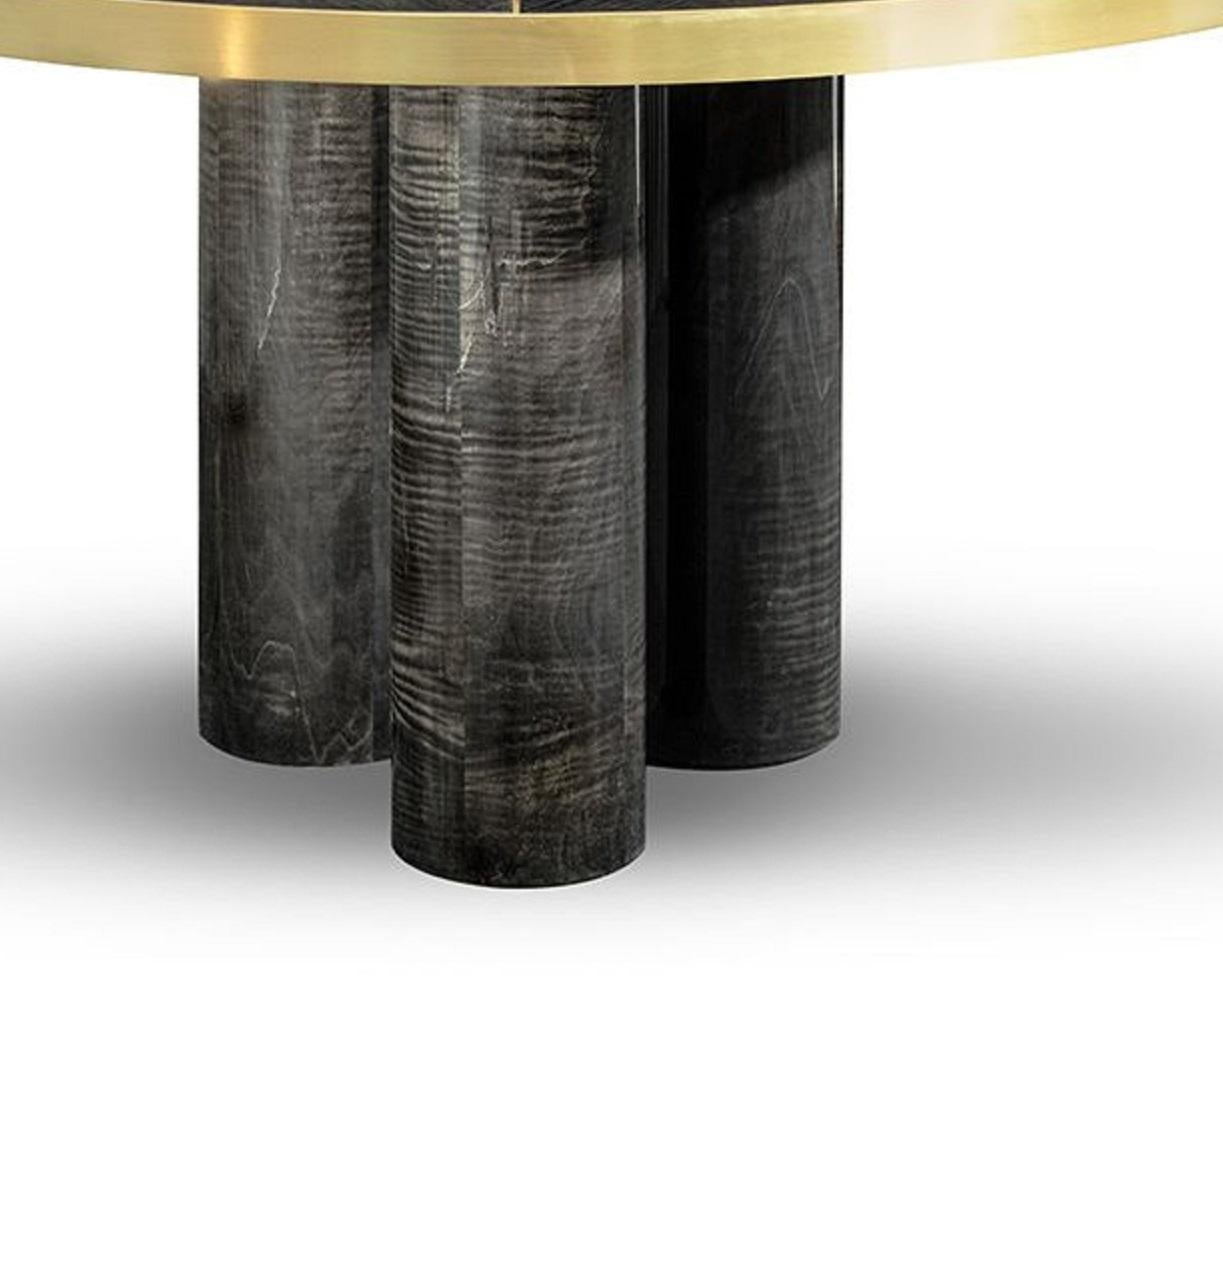 Ray dining table

The RAY dining table is presented with a sturdy figure. The delicate brushed brass lines define and give dimension to this finest design handmade with high gloss grey figured sikomoro. A bold and statement dining table that